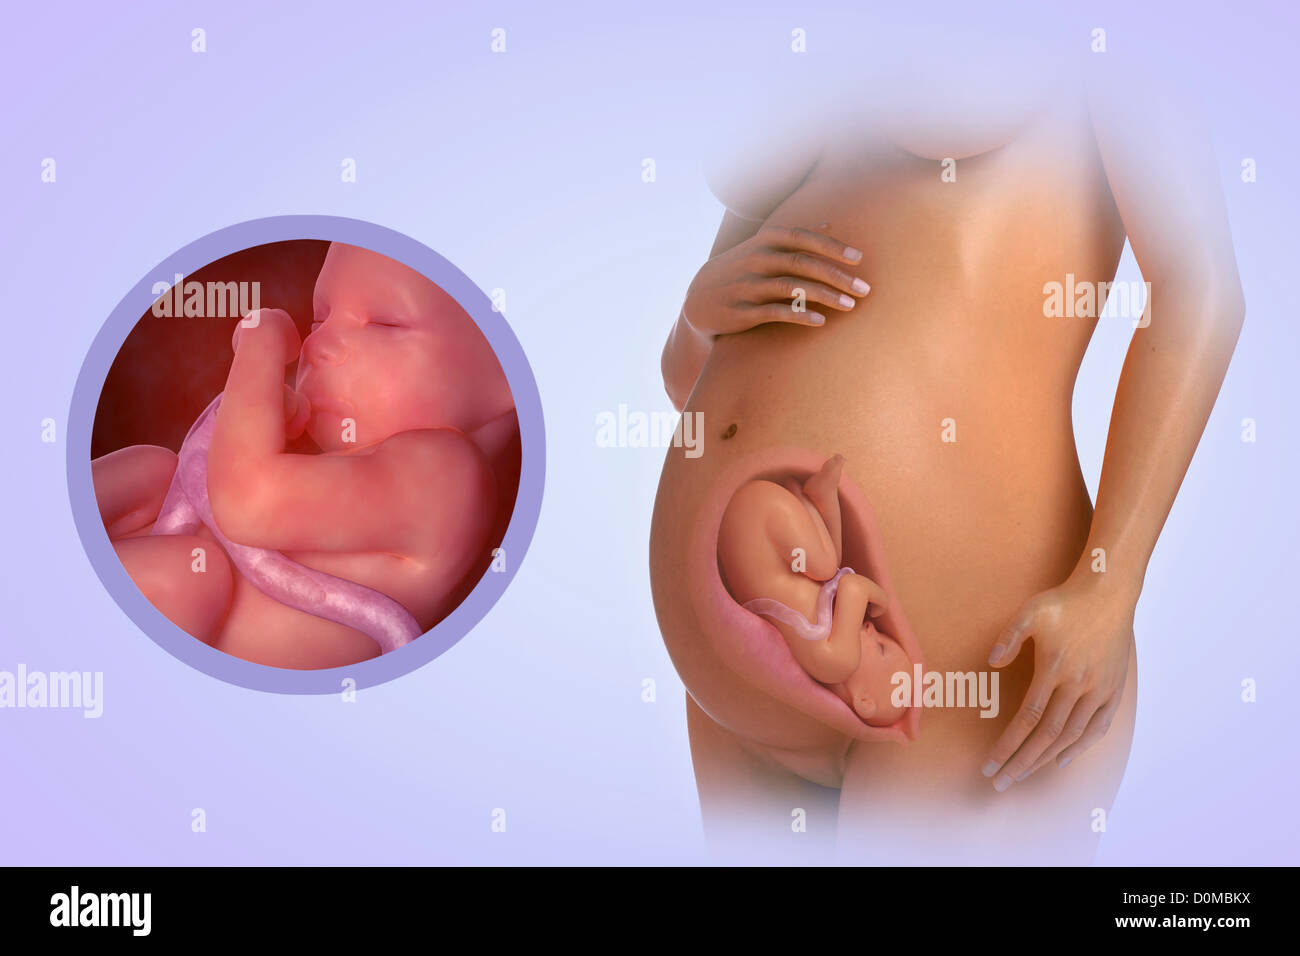 A human model showing pregnancy at week 31. Stock Photo